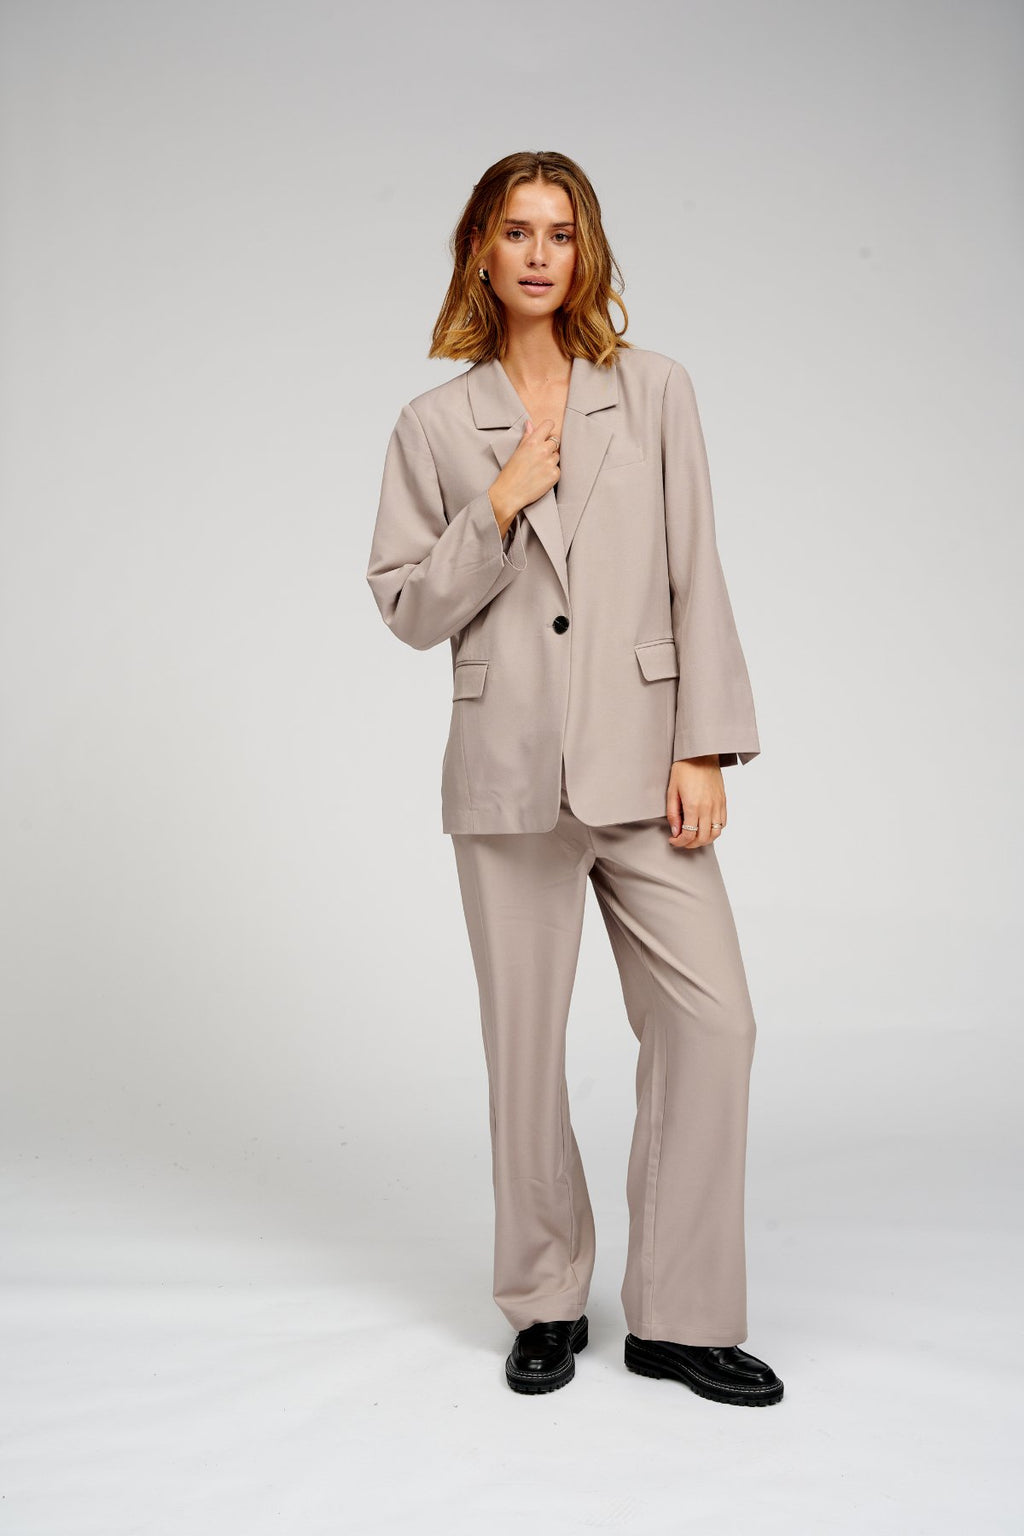 Oversized Suit (Grey) - Package Deal